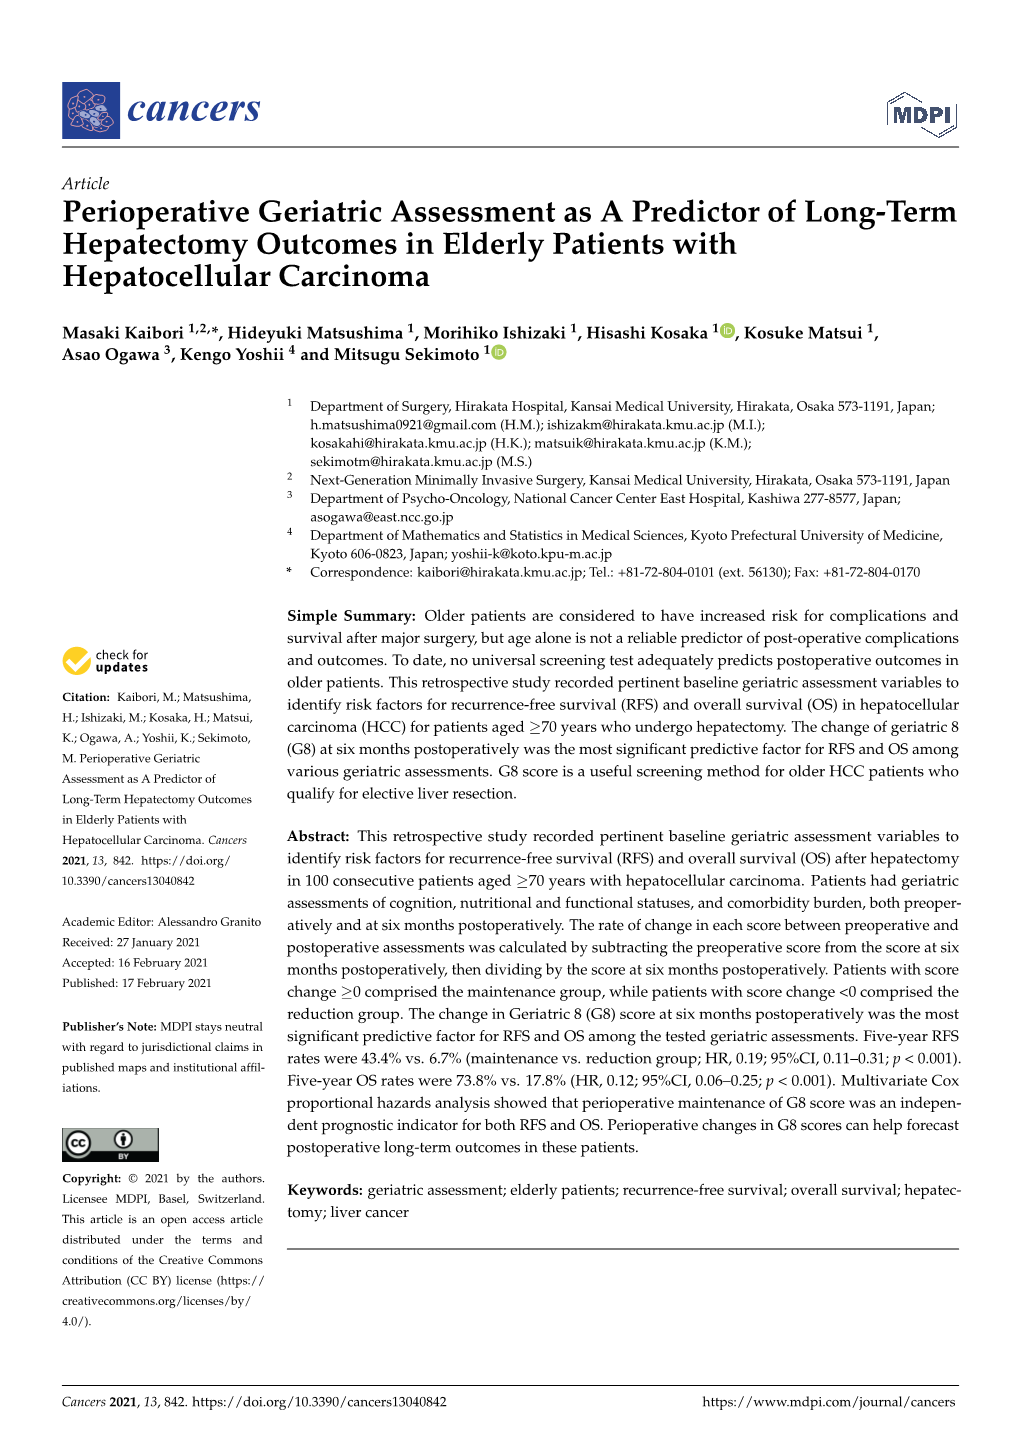 Perioperative Geriatric Assessment As a Predictor of Long-Term Hepatectomy Outcomes in Elderly Patients with Hepatocellular Carcinoma